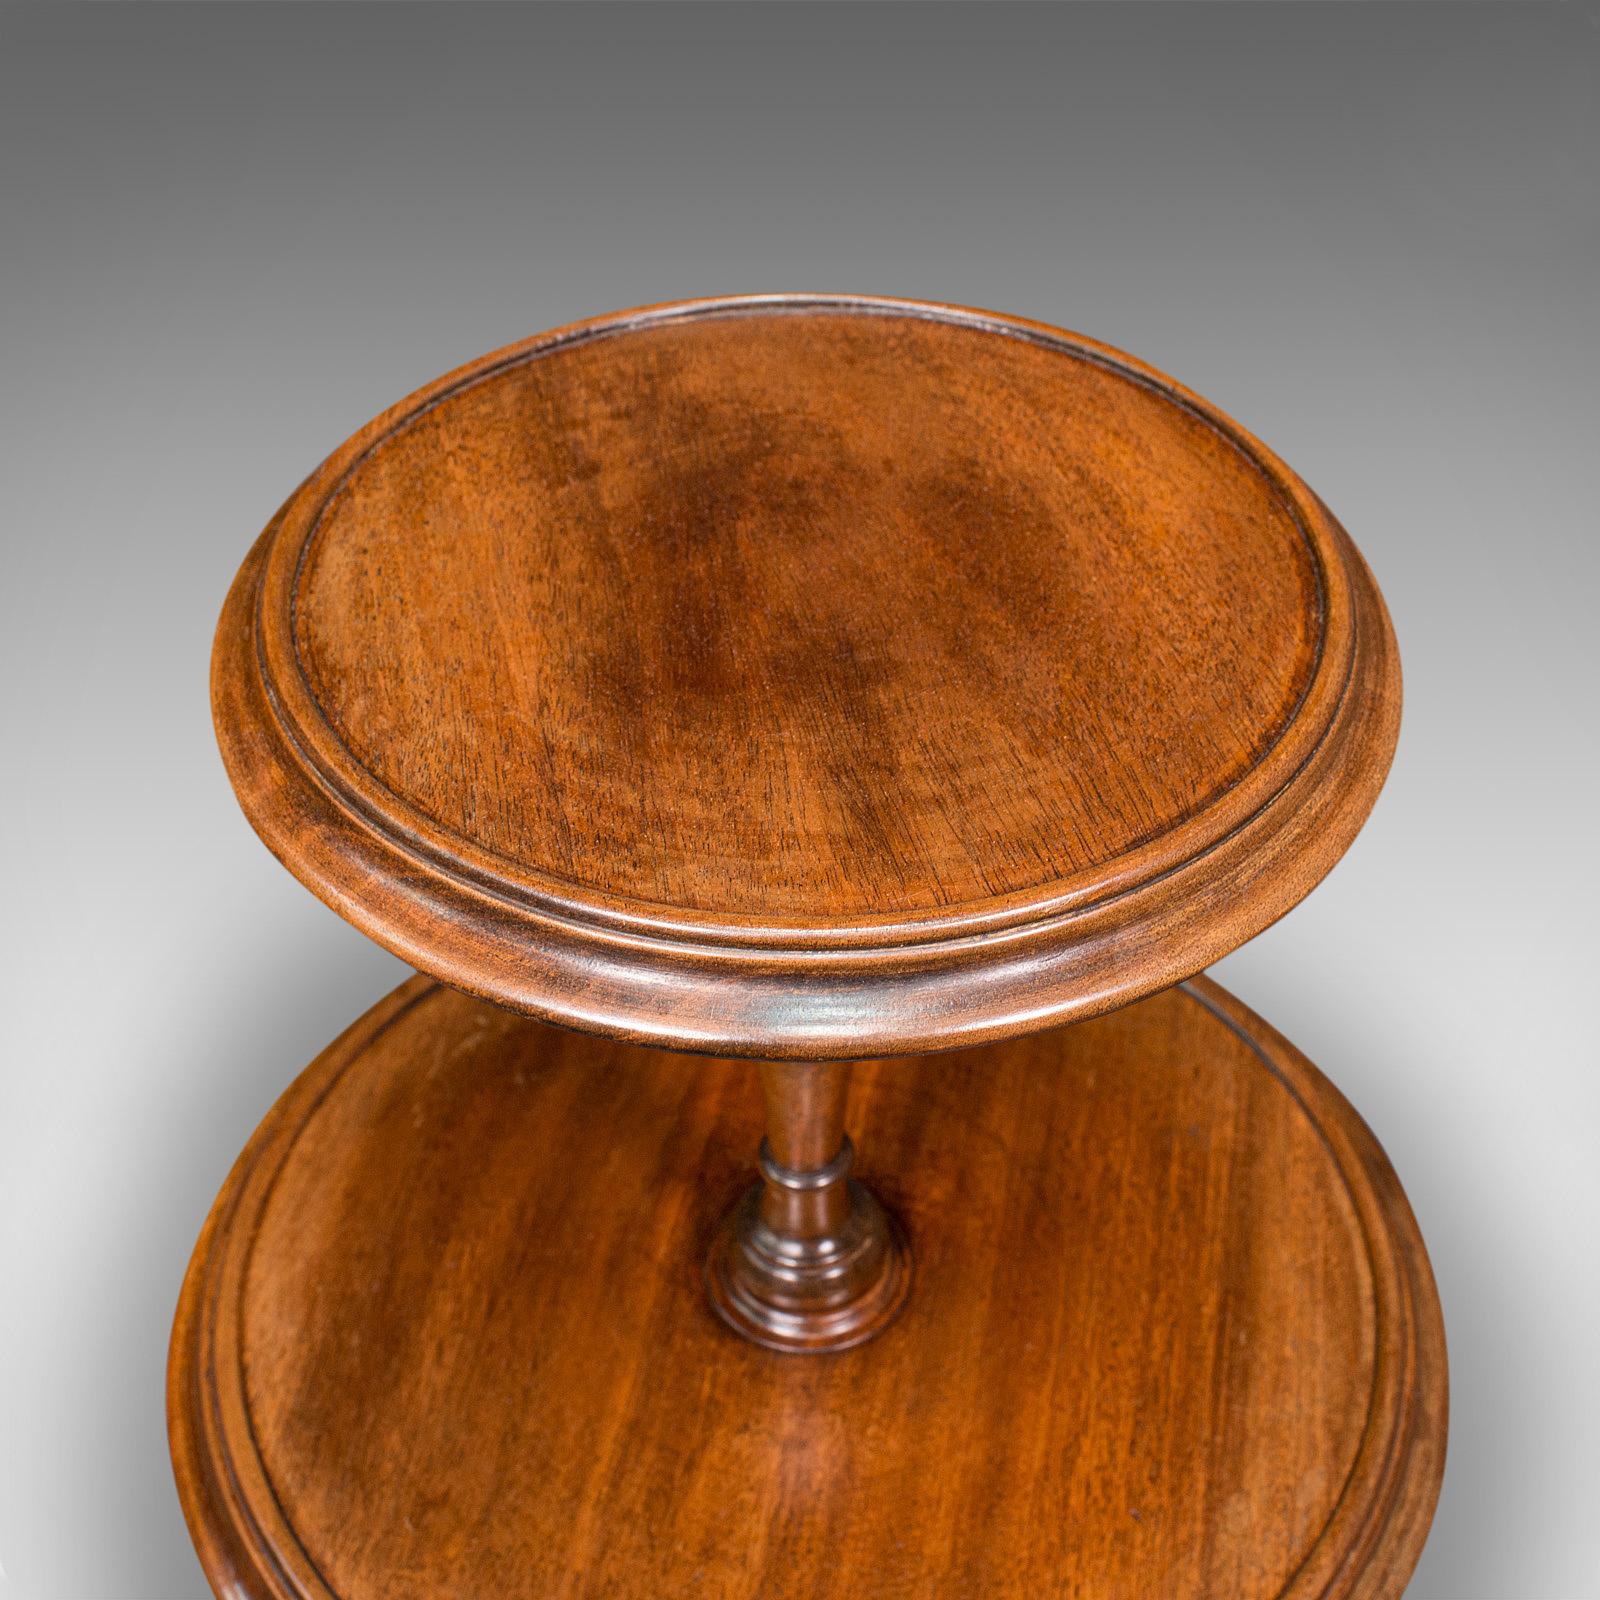 20th Century Antique Two Tier Table, English, Mahogany, Afternoon Tea, Cake Stand, Edwardian